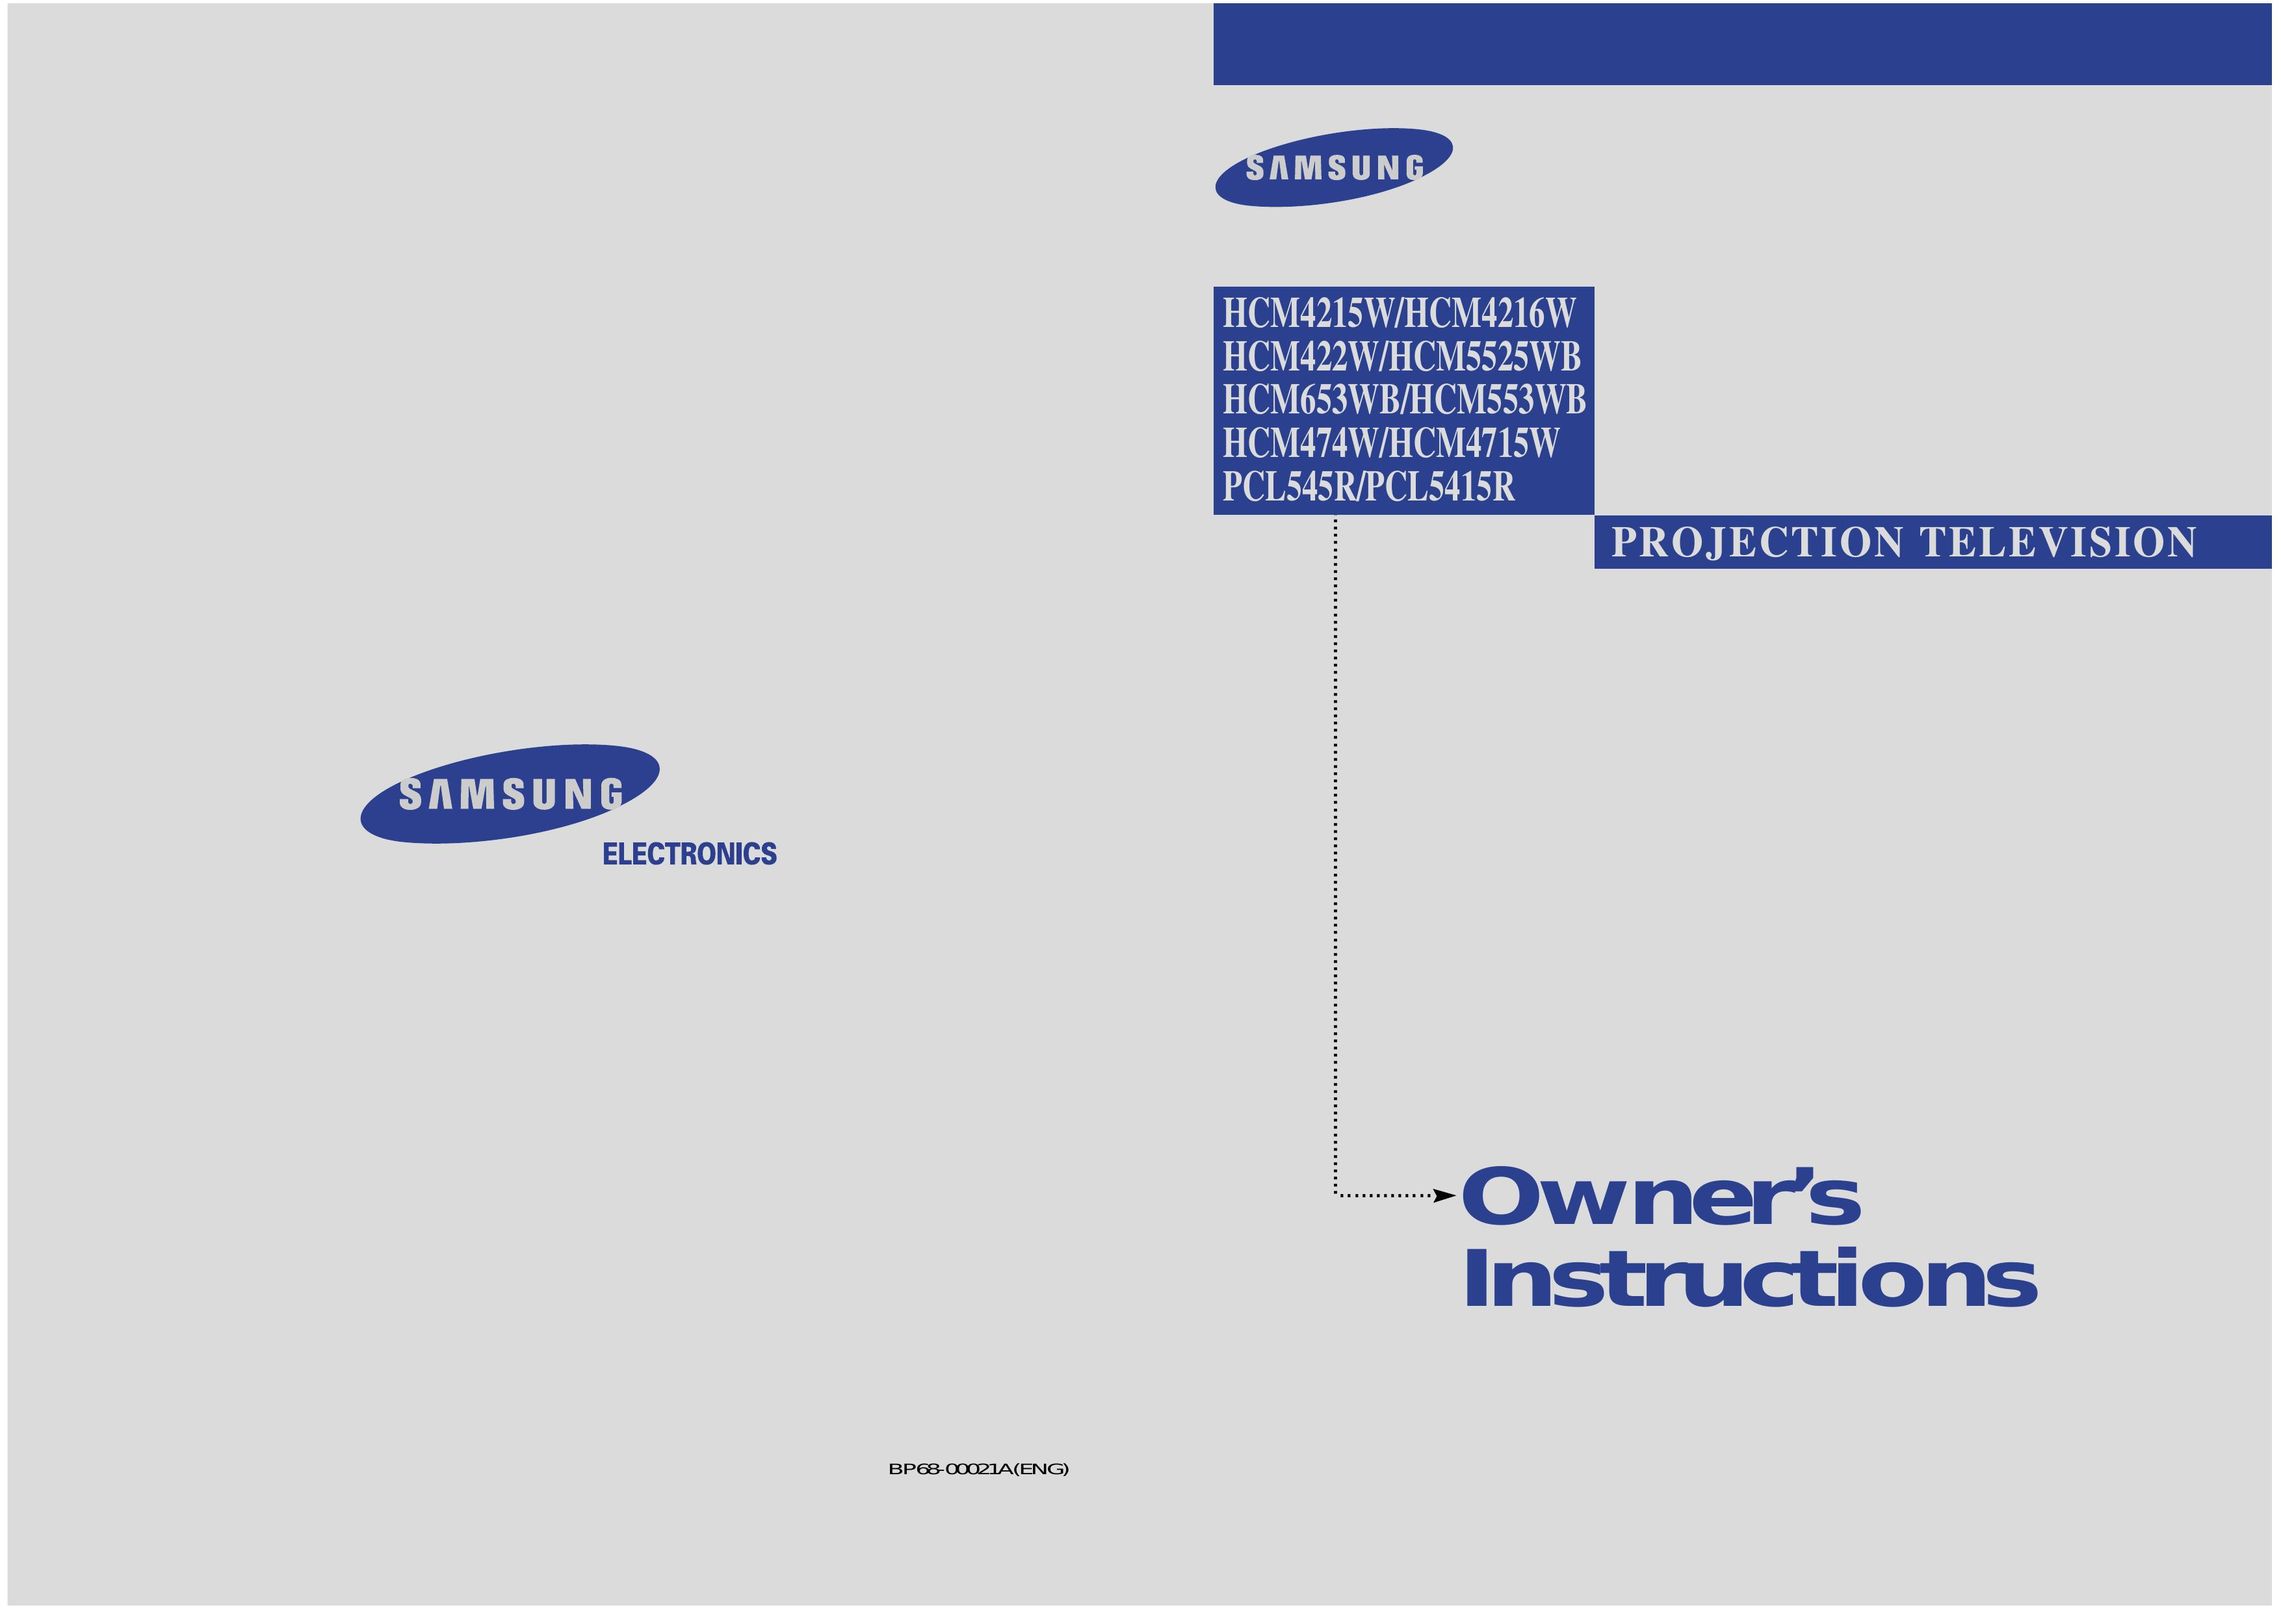 Samsung HCM474W Projection Television User Manual